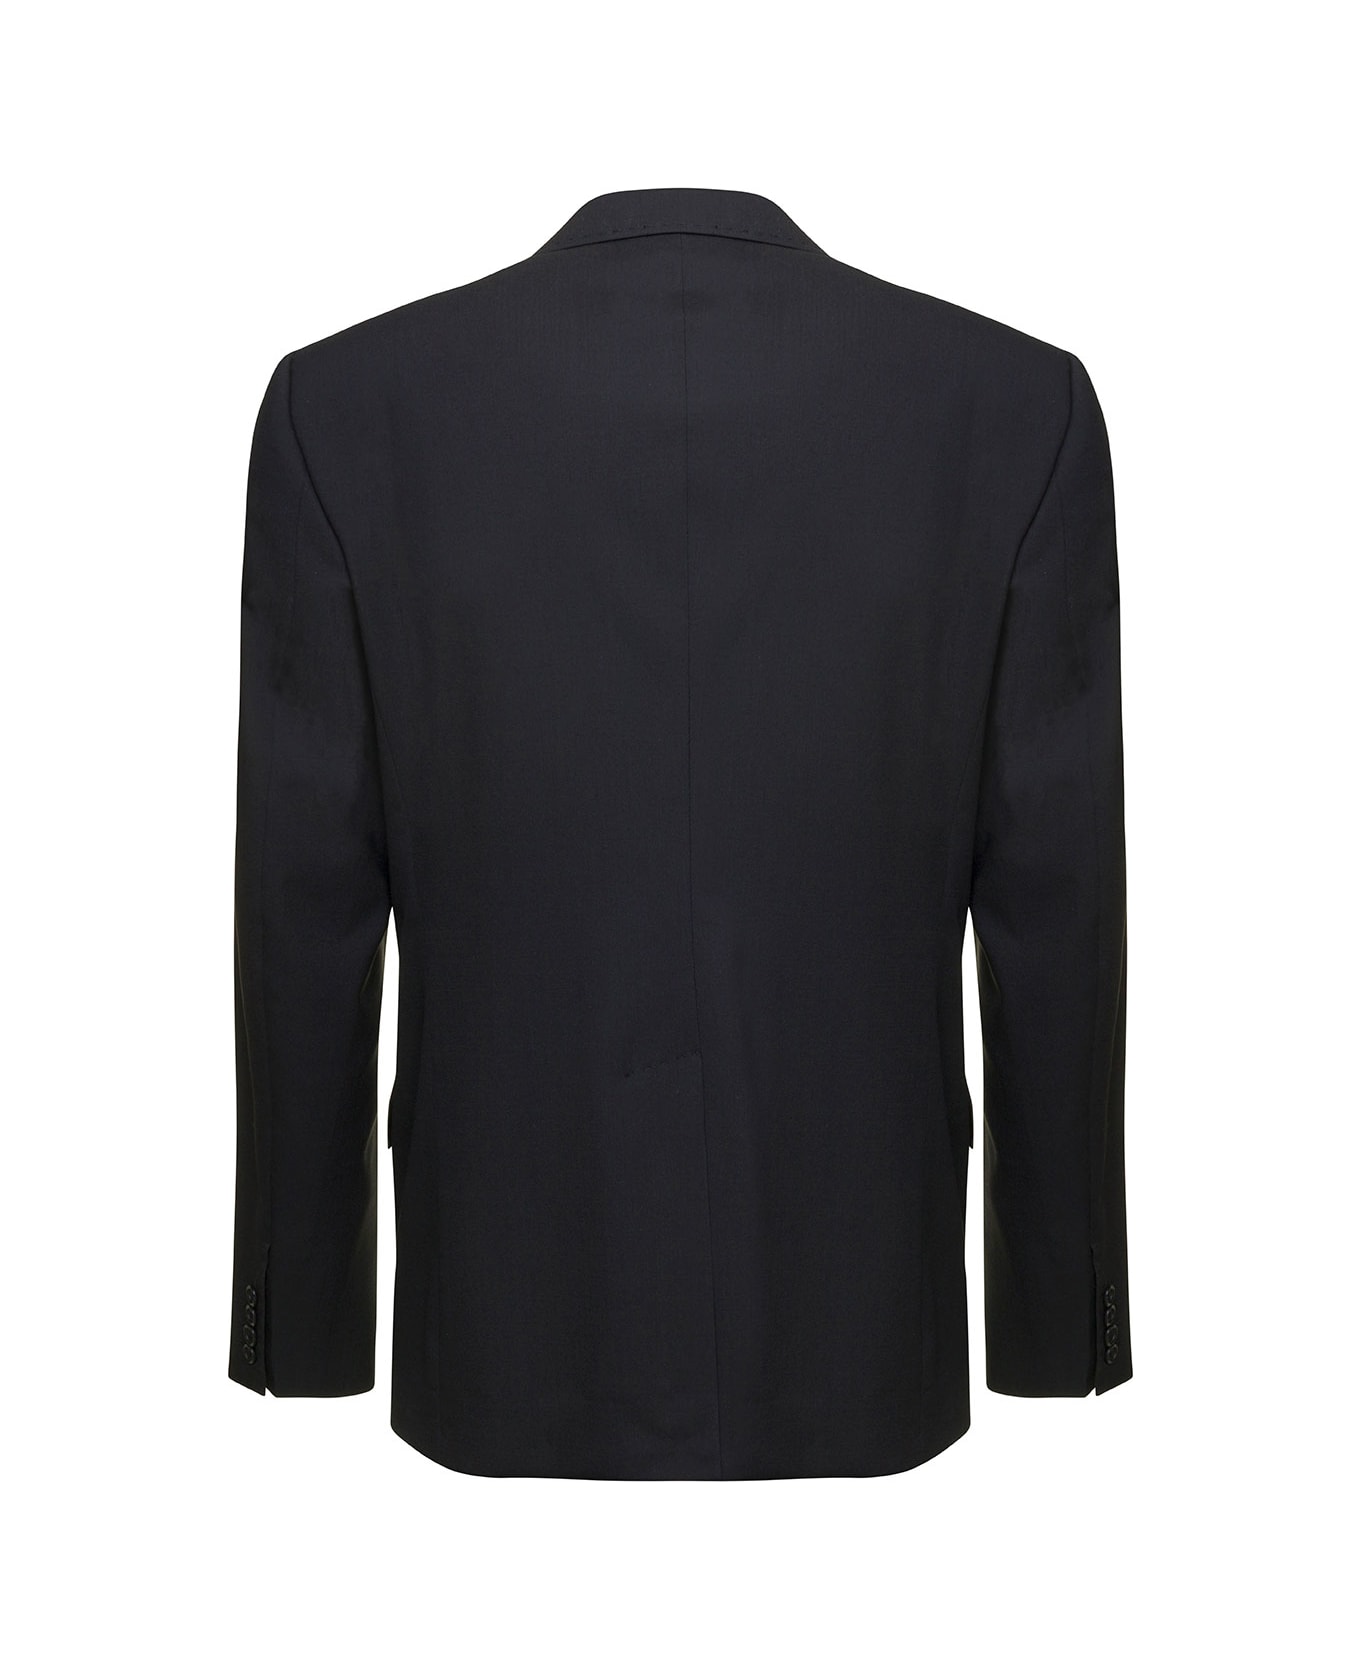 Dolce & Gabbana 'new Sicilia' Black Single-breasted Jacket With Concelaed Fastening In Stretch Wool Man - Black